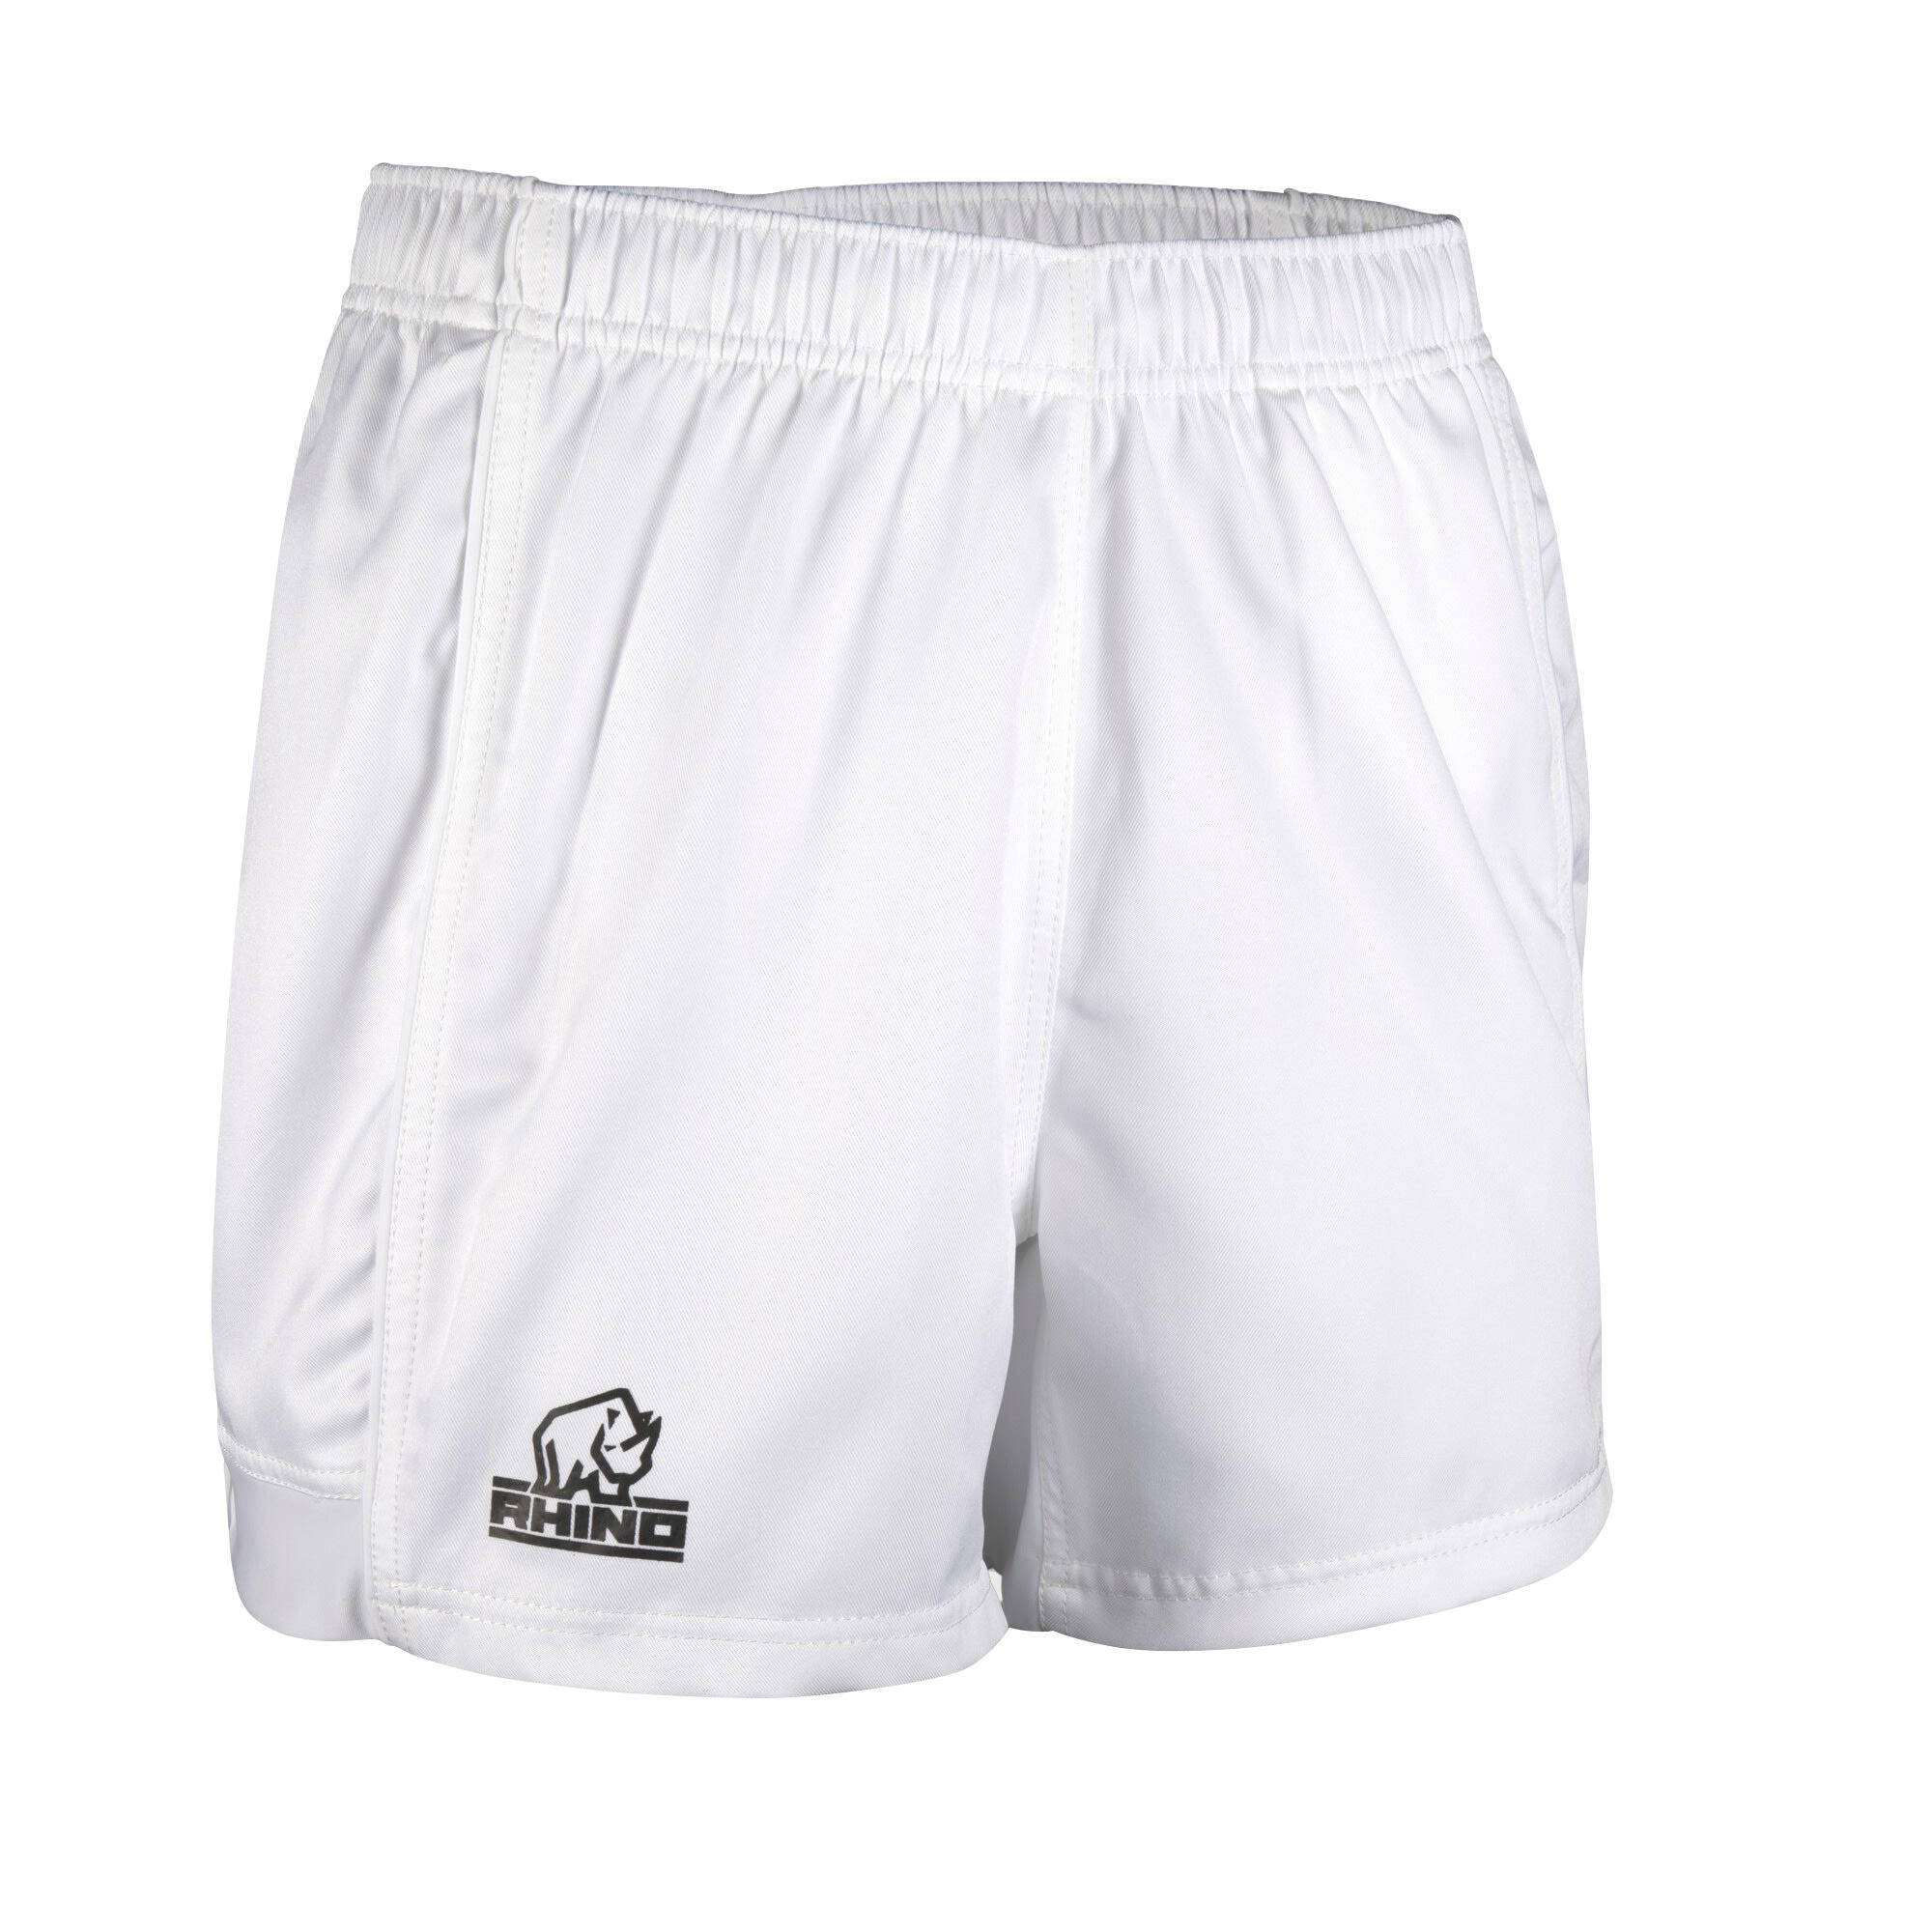 Childrens/Kids Auckland Rugby Shorts (White) 1/4